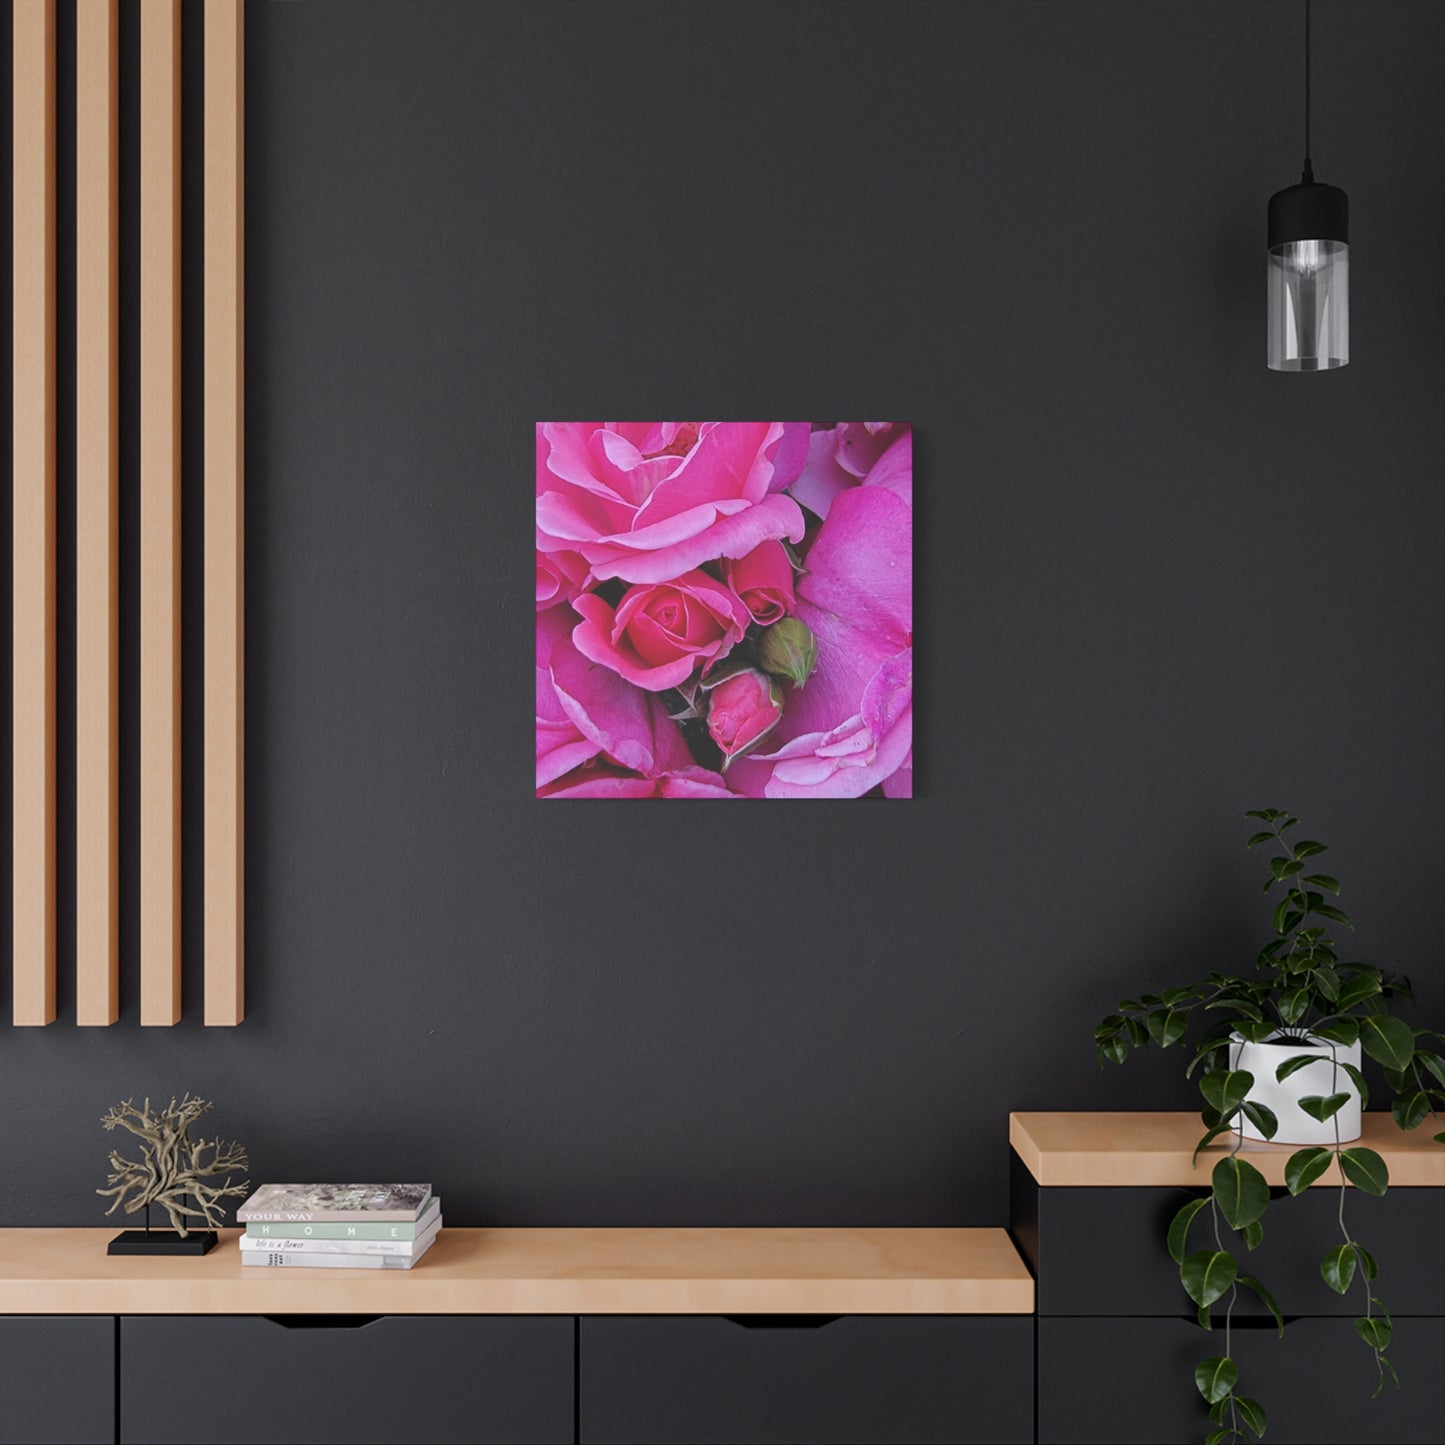 A Rose By Any Other Name, Matte Canvas, Stretched, 1.25"